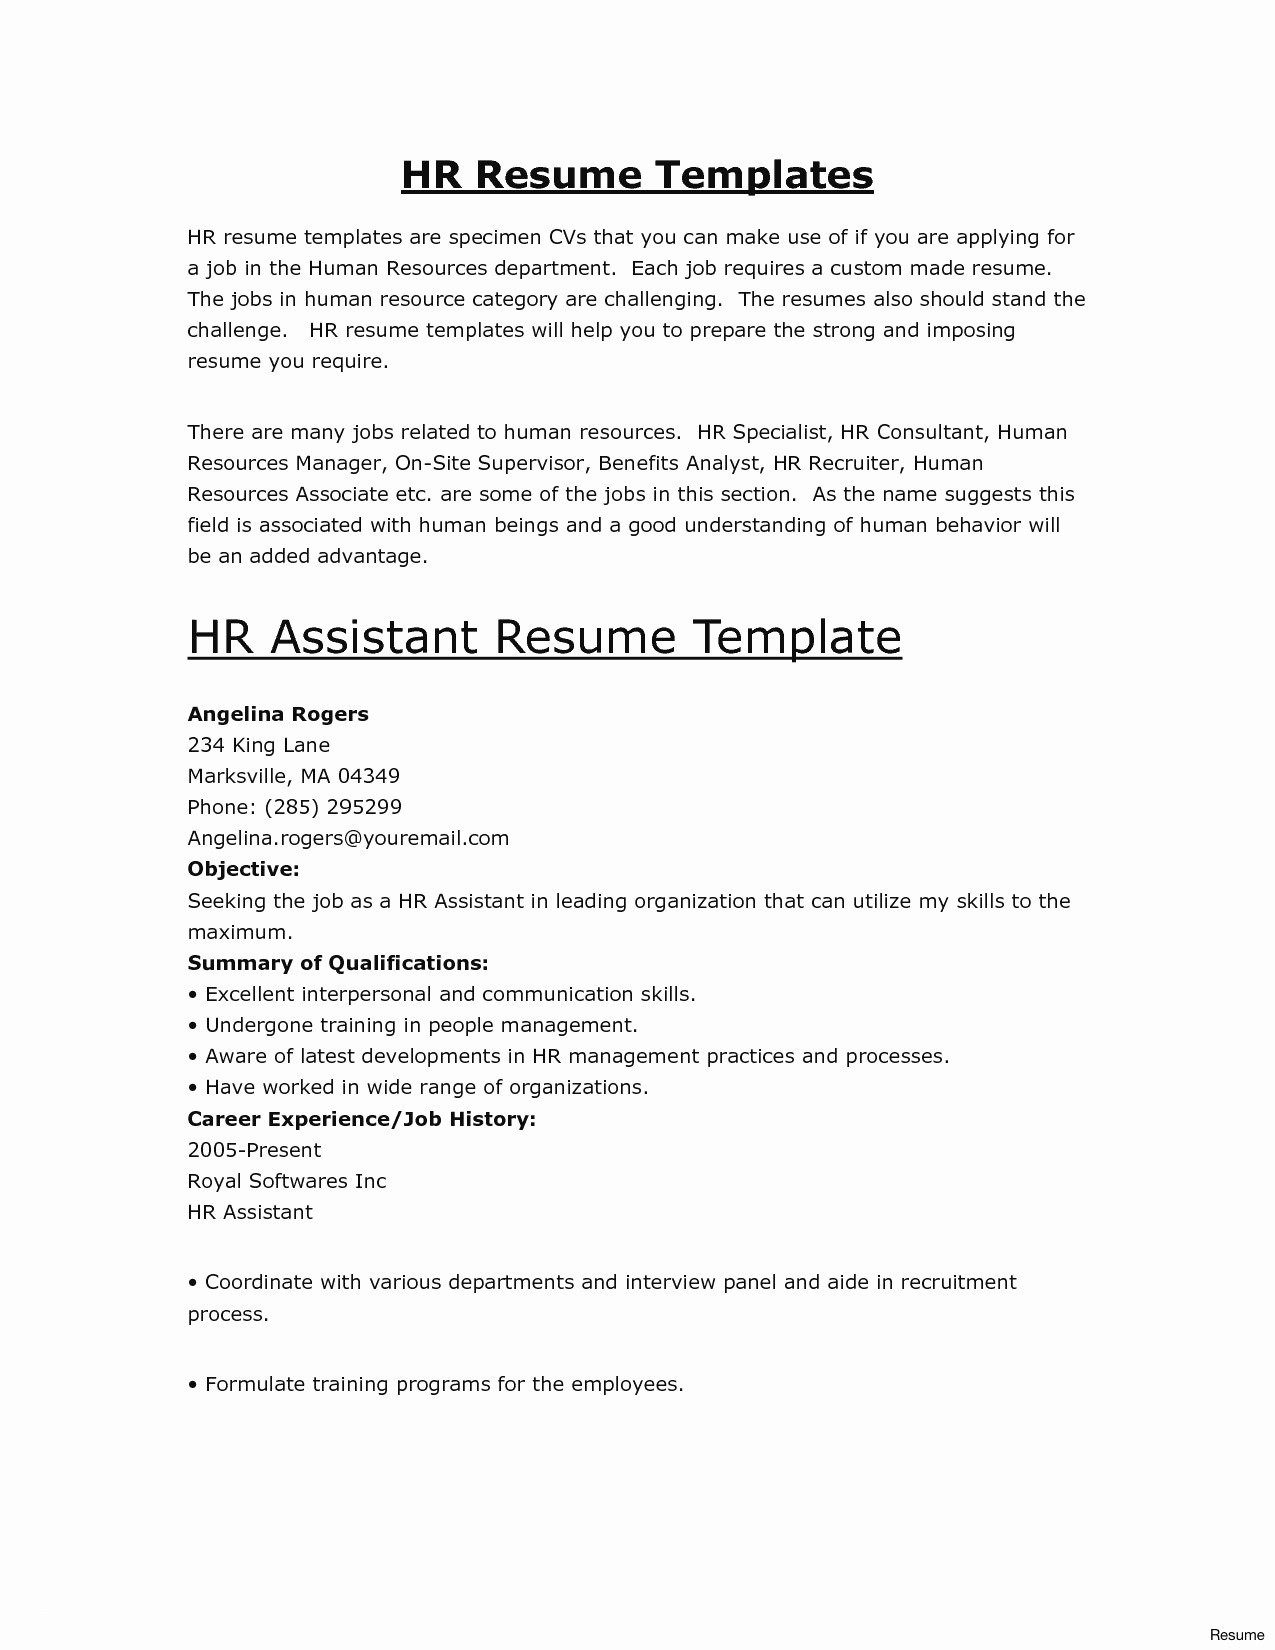 Cover Letter Template for Administrative assistant Job - Executive assistant Sample Resume Inspirational Executive assistant